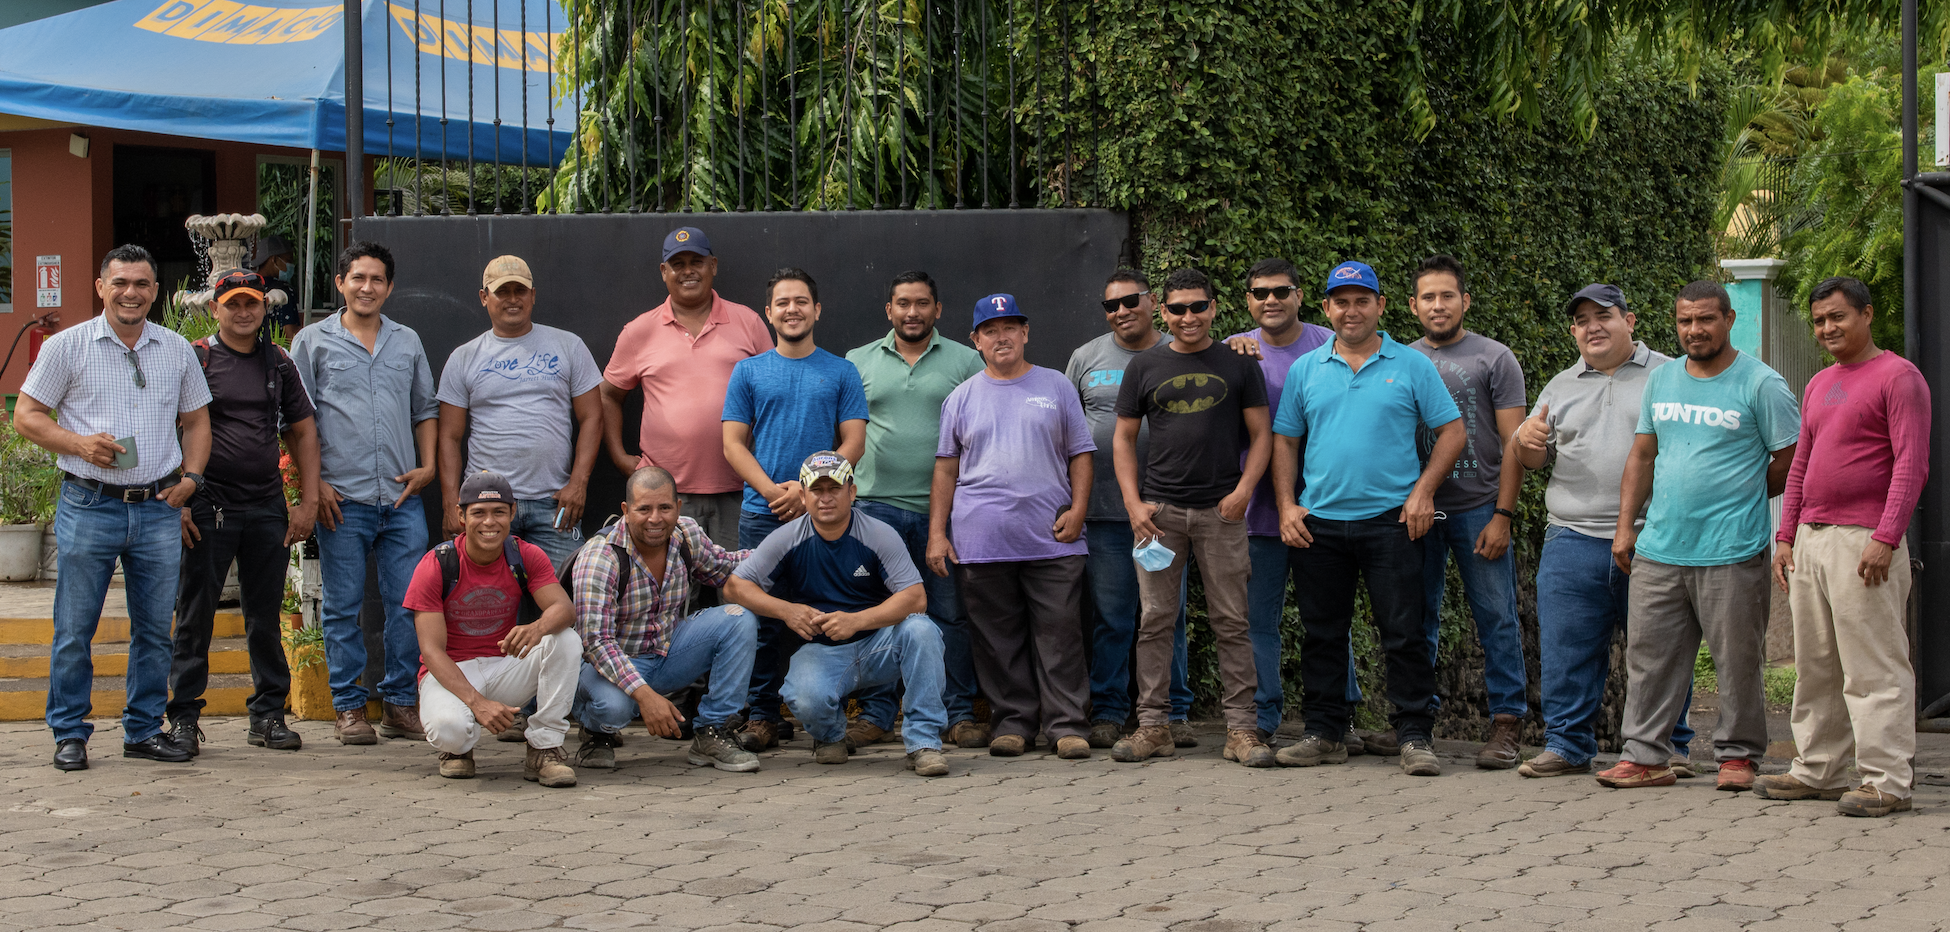 The Infrastructure Team is directly involved in every aspect of Amigos. From planning and designing community water systems to constructing modern bathrooms and clean air kitchens, the engineers, architects, and masons on the Infrastructure Team facilitate life transformation.